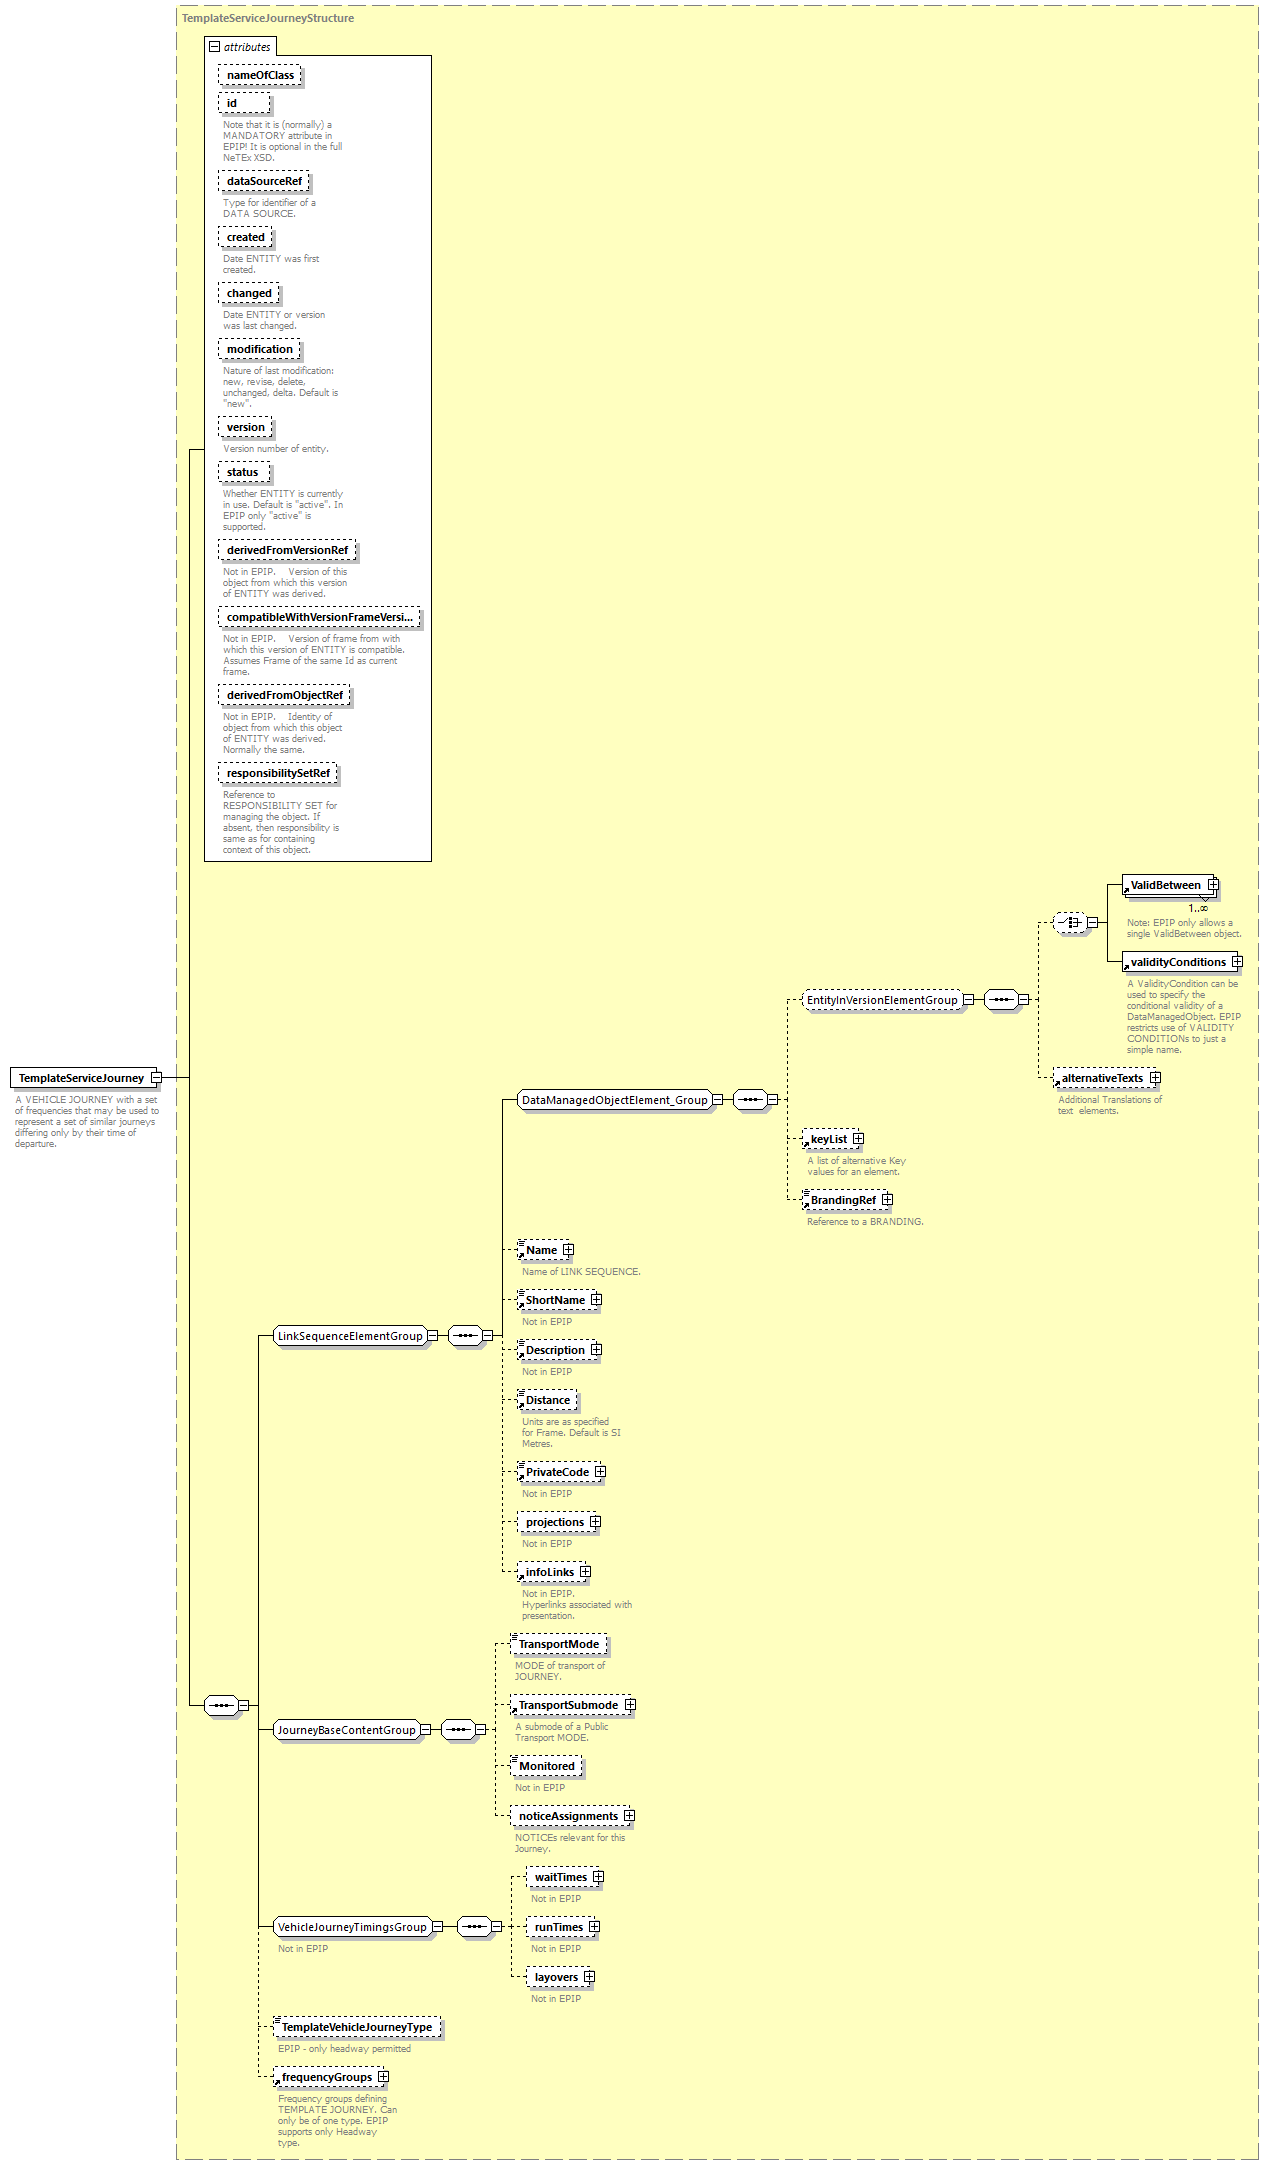 reduced_diagrams/reduced_p445.png